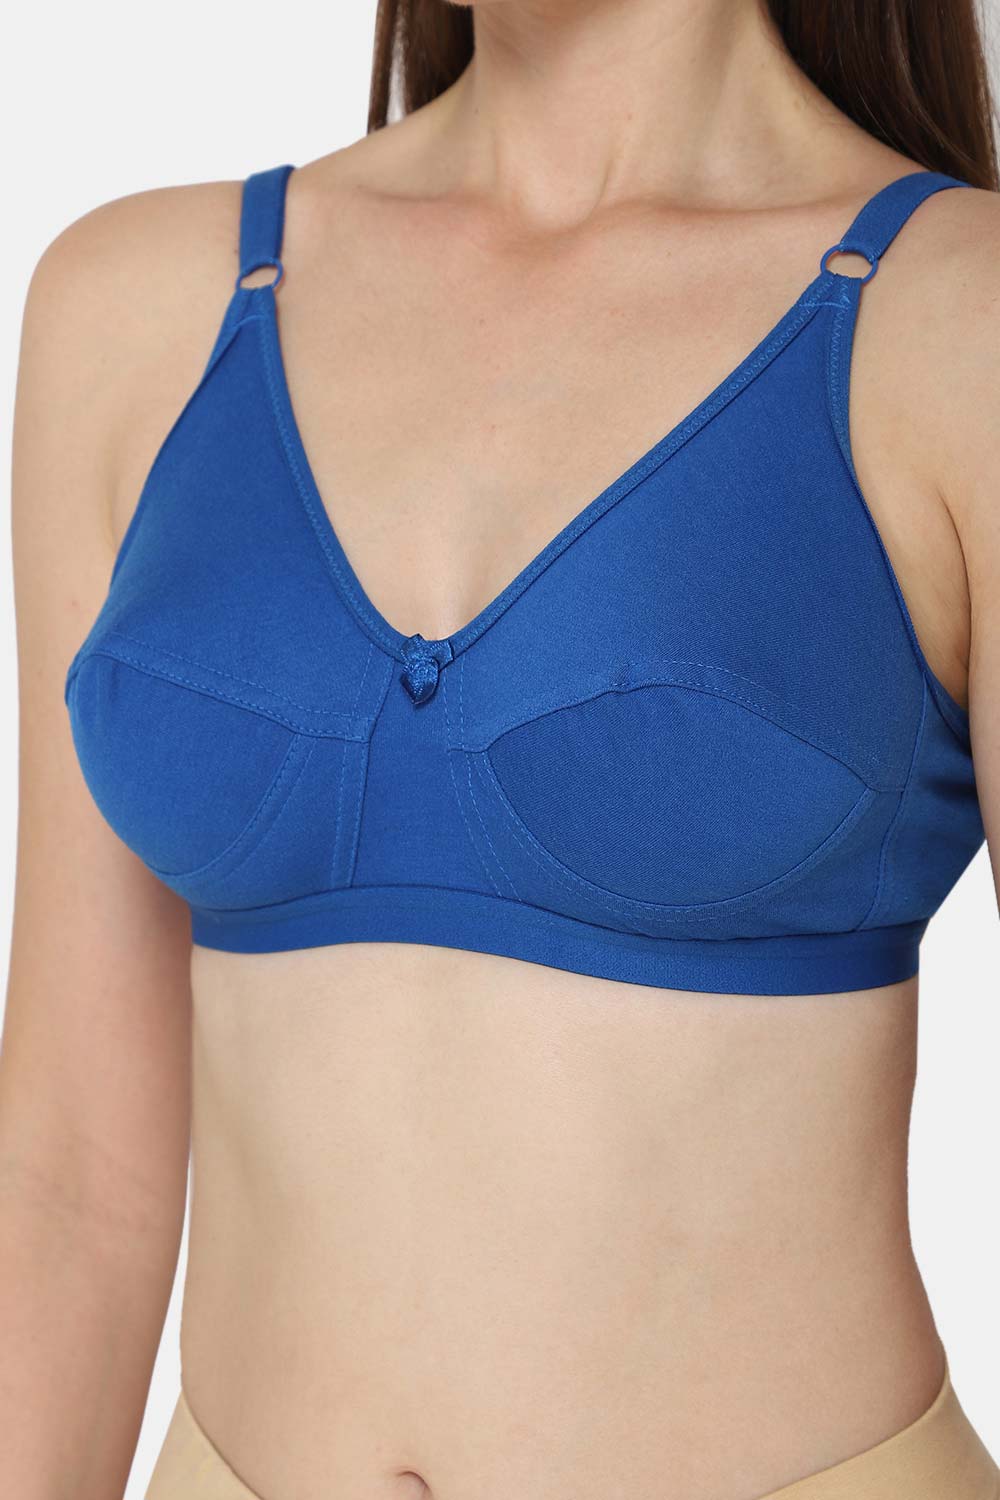 Intimacy Saree Bra Special Combo Pack - INT01 - C34